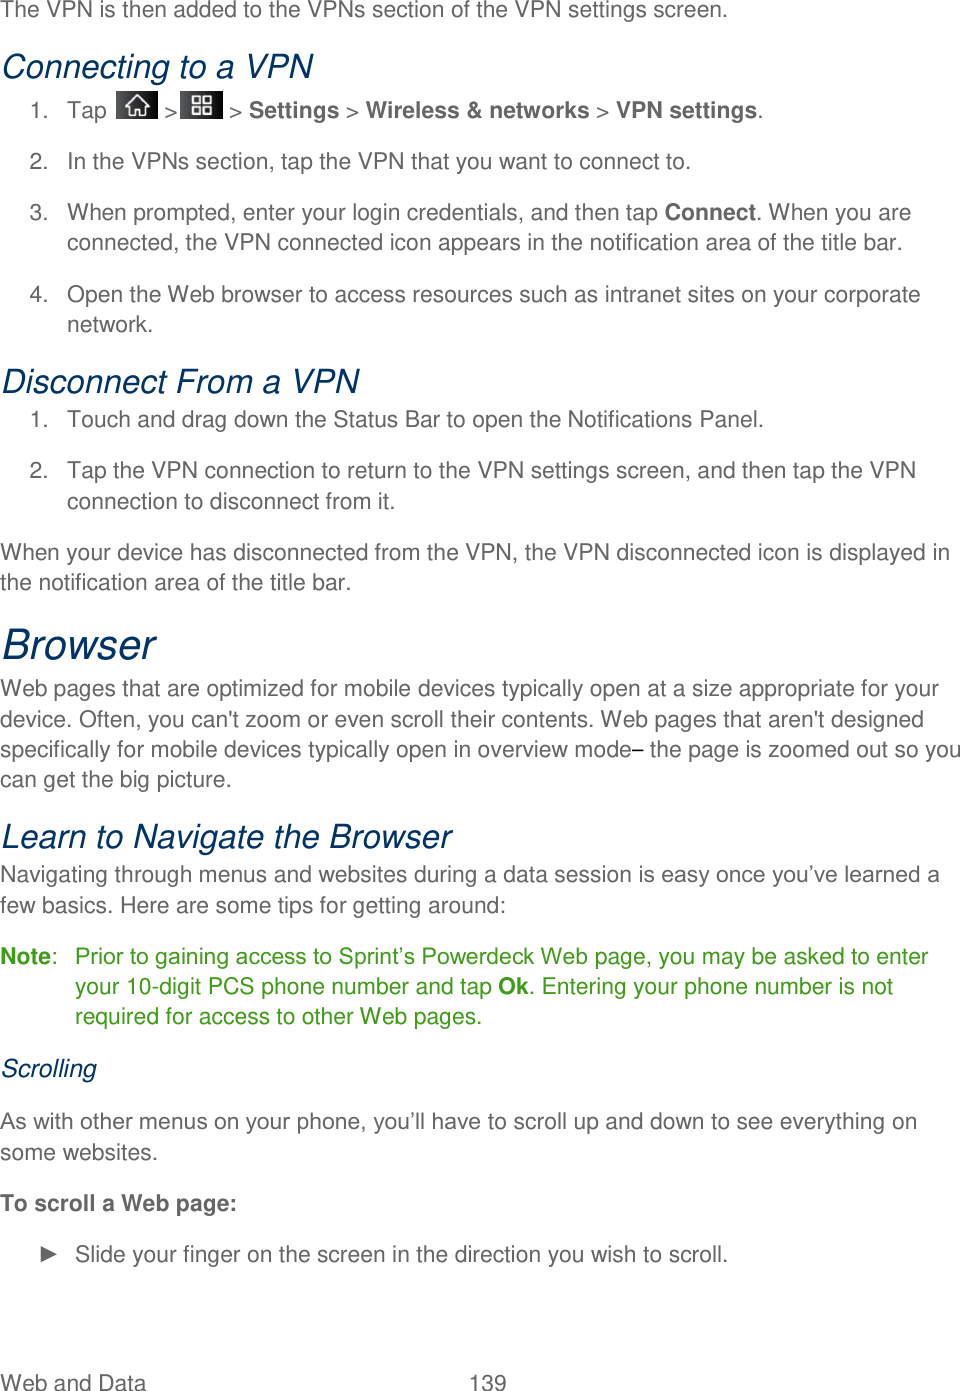 Web and Data  139 The VPN is then added to the VPNs section of the VPN settings screen. Connecting to a VPN 1.  Tap   &gt;  &gt; Settings &gt; Wireless &amp; networks &gt; VPN settings. 2.  In the VPNs section, tap the VPN that you want to connect to. 3.  When prompted, enter your login credentials, and then tap Connect. When you are connected, the VPN connected icon appears in the notification area of the title bar. 4.  Open the Web browser to access resources such as intranet sites on your corporate network. Disconnect From a VPN 1.  Touch and drag down the Status Bar to open the Notifications Panel. 2.  Tap the VPN connection to return to the VPN settings screen, and then tap the VPN connection to disconnect from it. When your device has disconnected from the VPN, the VPN disconnected icon is displayed in the notification area of the title bar. Browser Web pages that are optimized for mobile devices typically open at a size appropriate for your device. Often, you can&apos;t zoom or even scroll their contents. Web pages that aren&apos;t designed specifically for mobile devices typically open in overview mode– the page is zoomed out so you can get the big picture. Learn to Navigate the Browser Navigating through menus and websites during a data session is easy once you‘ve learned a few basics. Here are some tips for getting around: Note:  Prior to gaining access to Sprint‘s Powerdeck Web page, you may be asked to enter your 10-digit PCS phone number and tap Ok. Entering your phone number is not required for access to other Web pages. Scrolling As with other menus on your phone, you‘ll have to scroll up and down to see everything on some websites. To scroll a Web page: ►  Slide your finger on the screen in the direction you wish to scroll. 